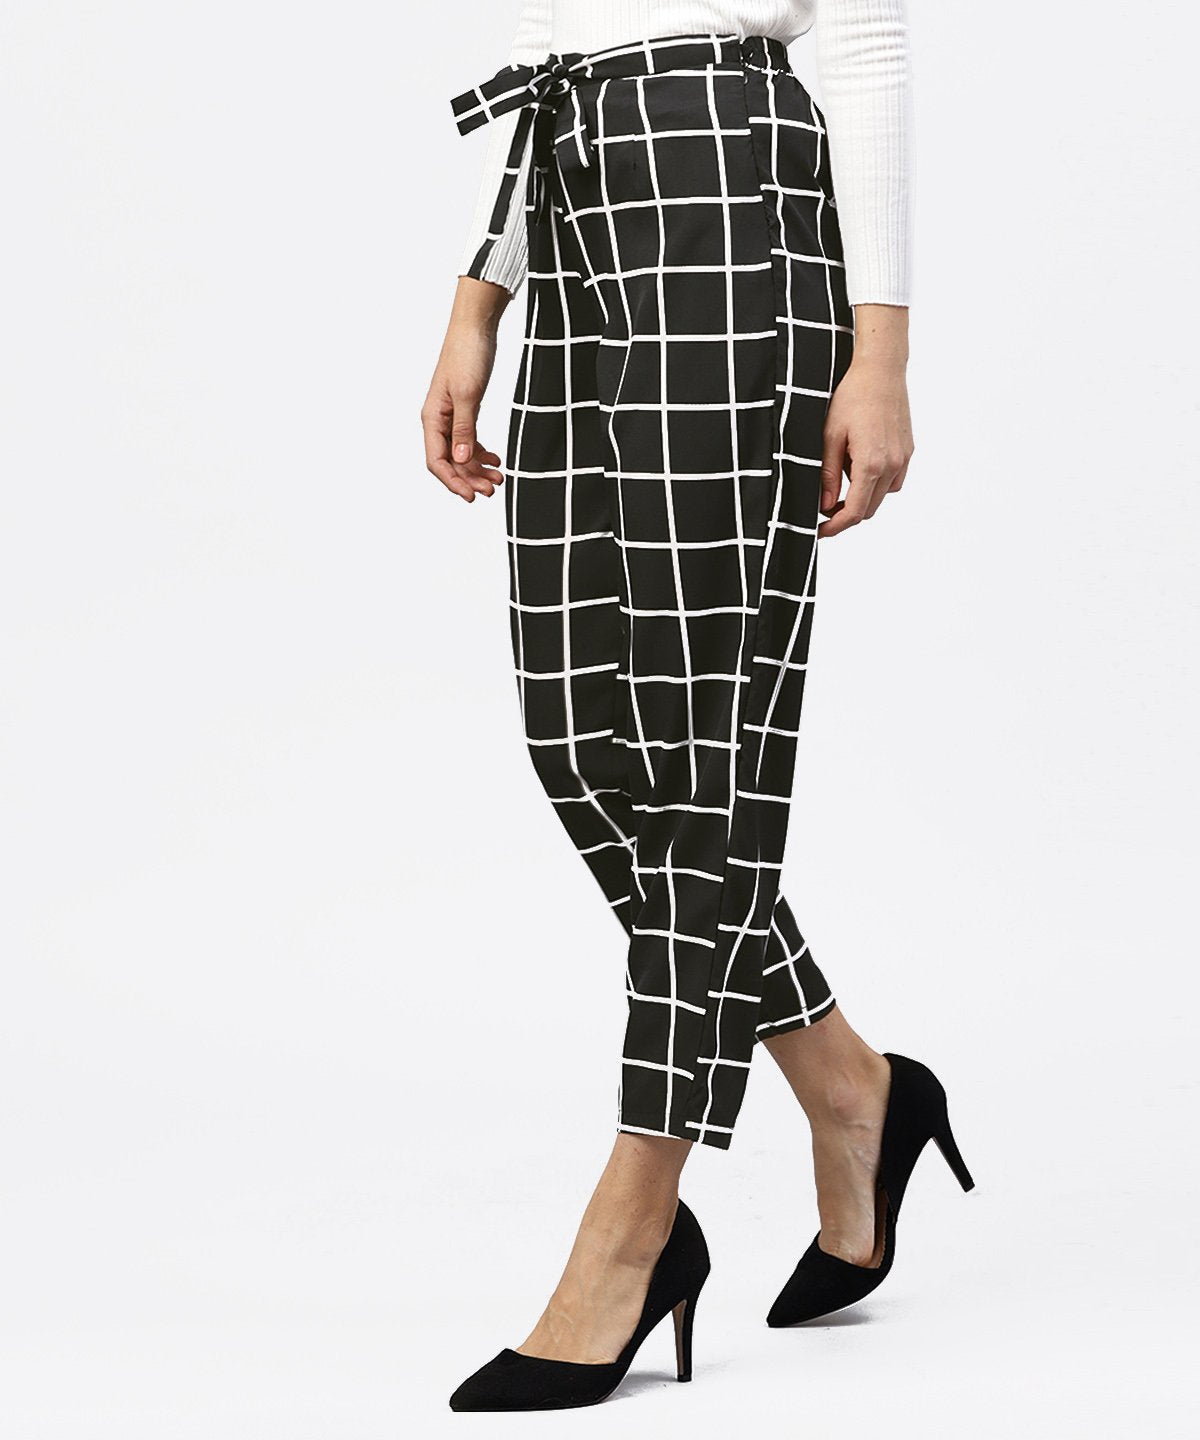 Women's Black & White Checked Trouser With Side Pockets - Nayo Clothing